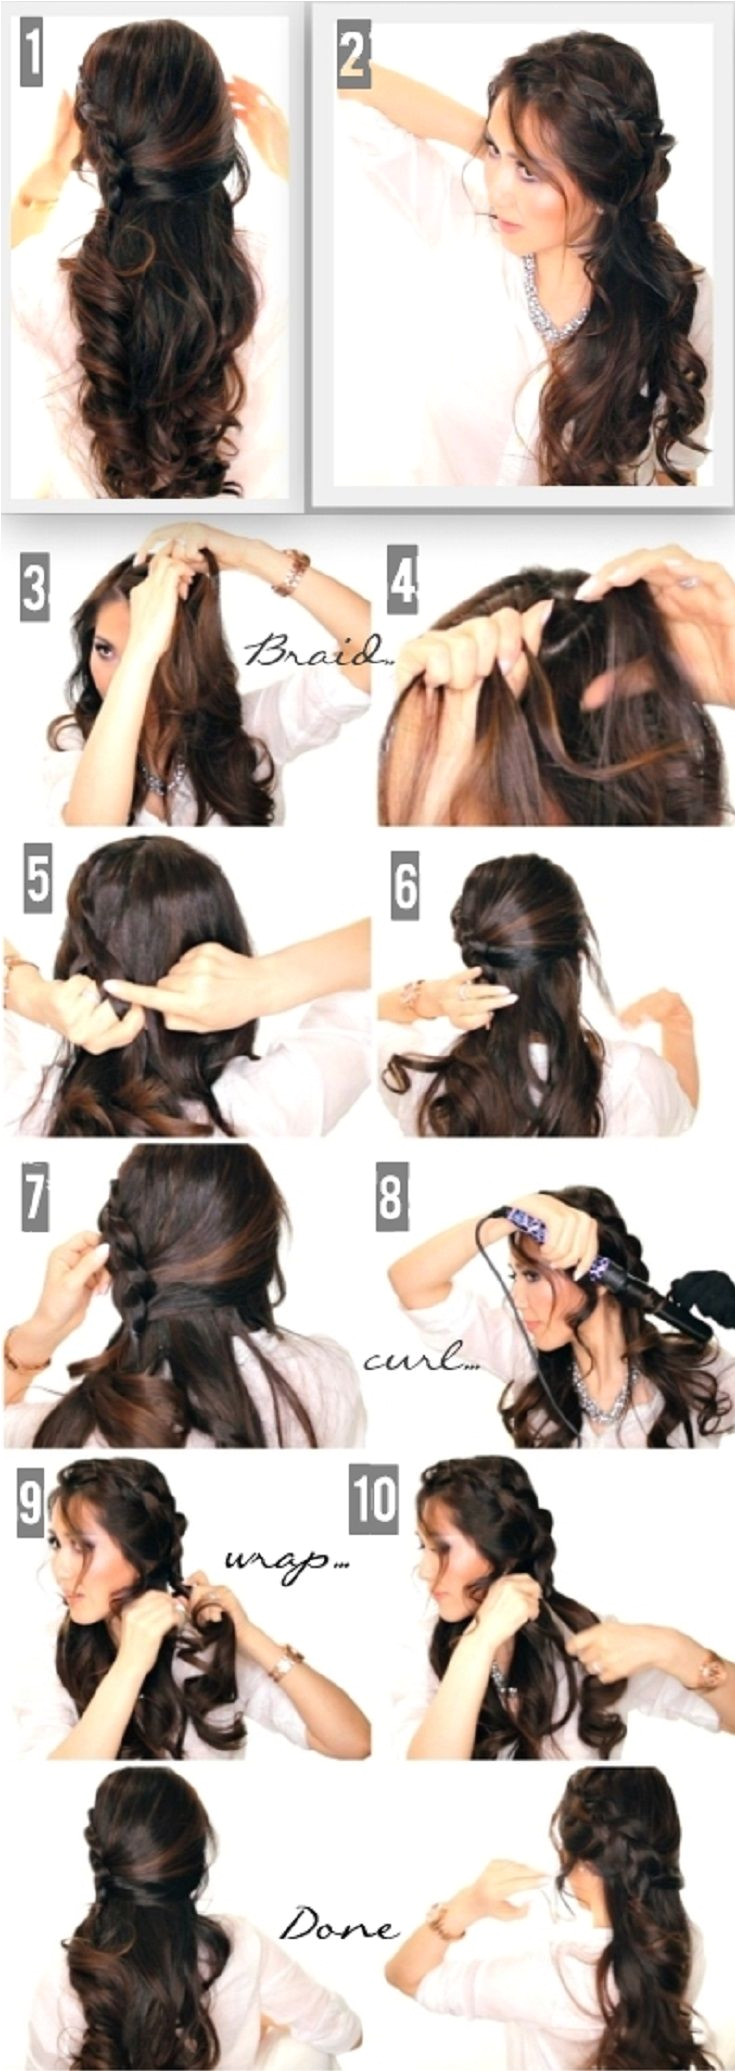 Top 10 Half Up Half Down Hair Tutorials You Must Have